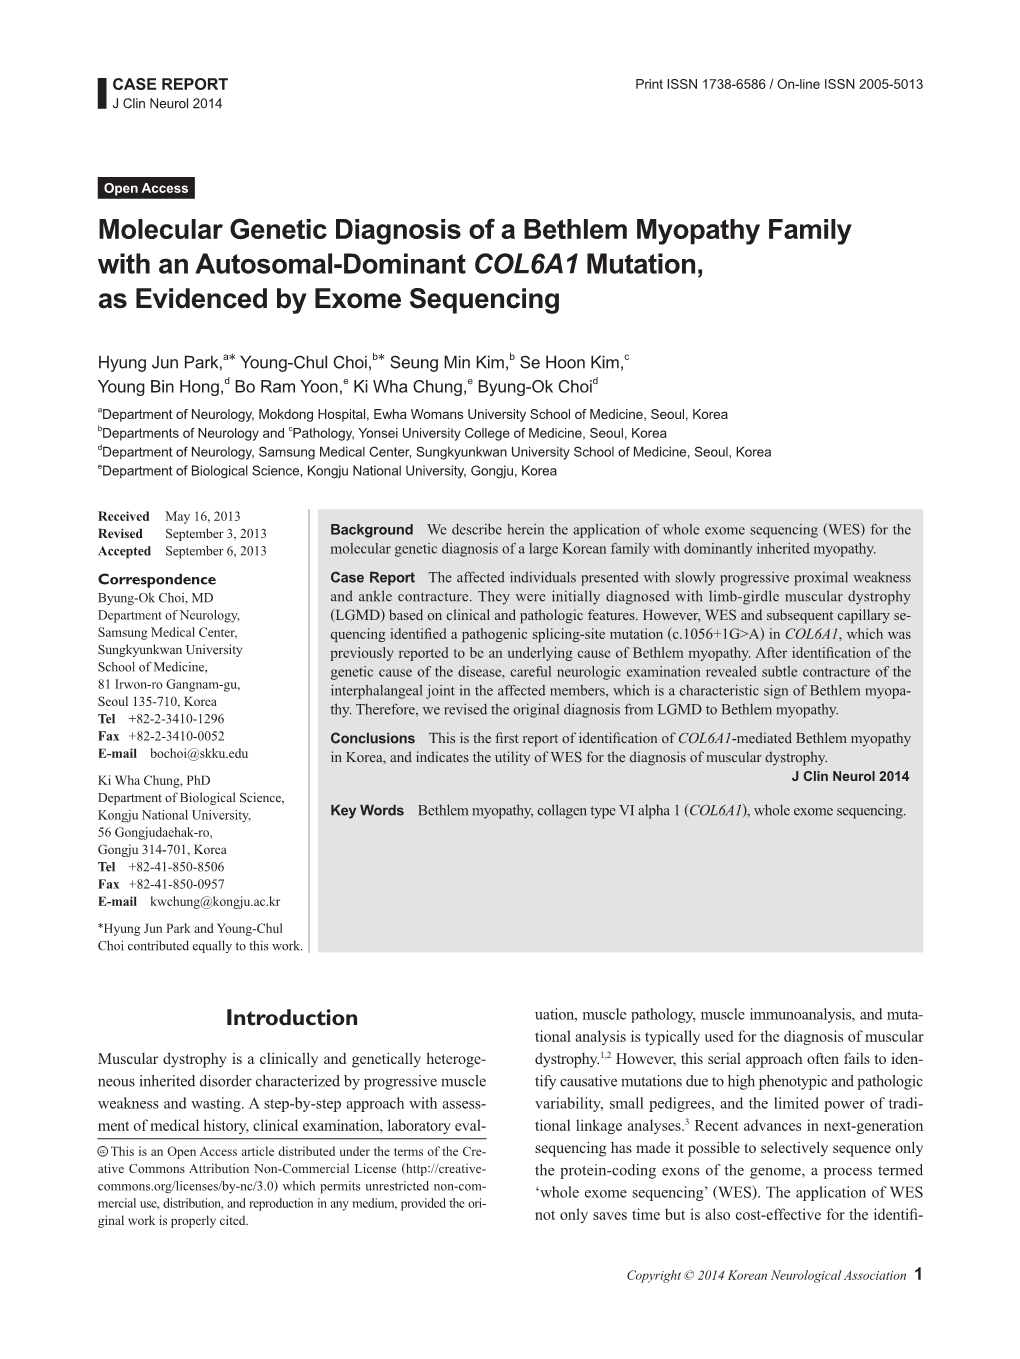 Molecular Genetic Diagnosis of a Bethlem Myopathy Family with an Autosomal-Dominant COL6A1 Mutation, As Evidenced by Exome Sequencing